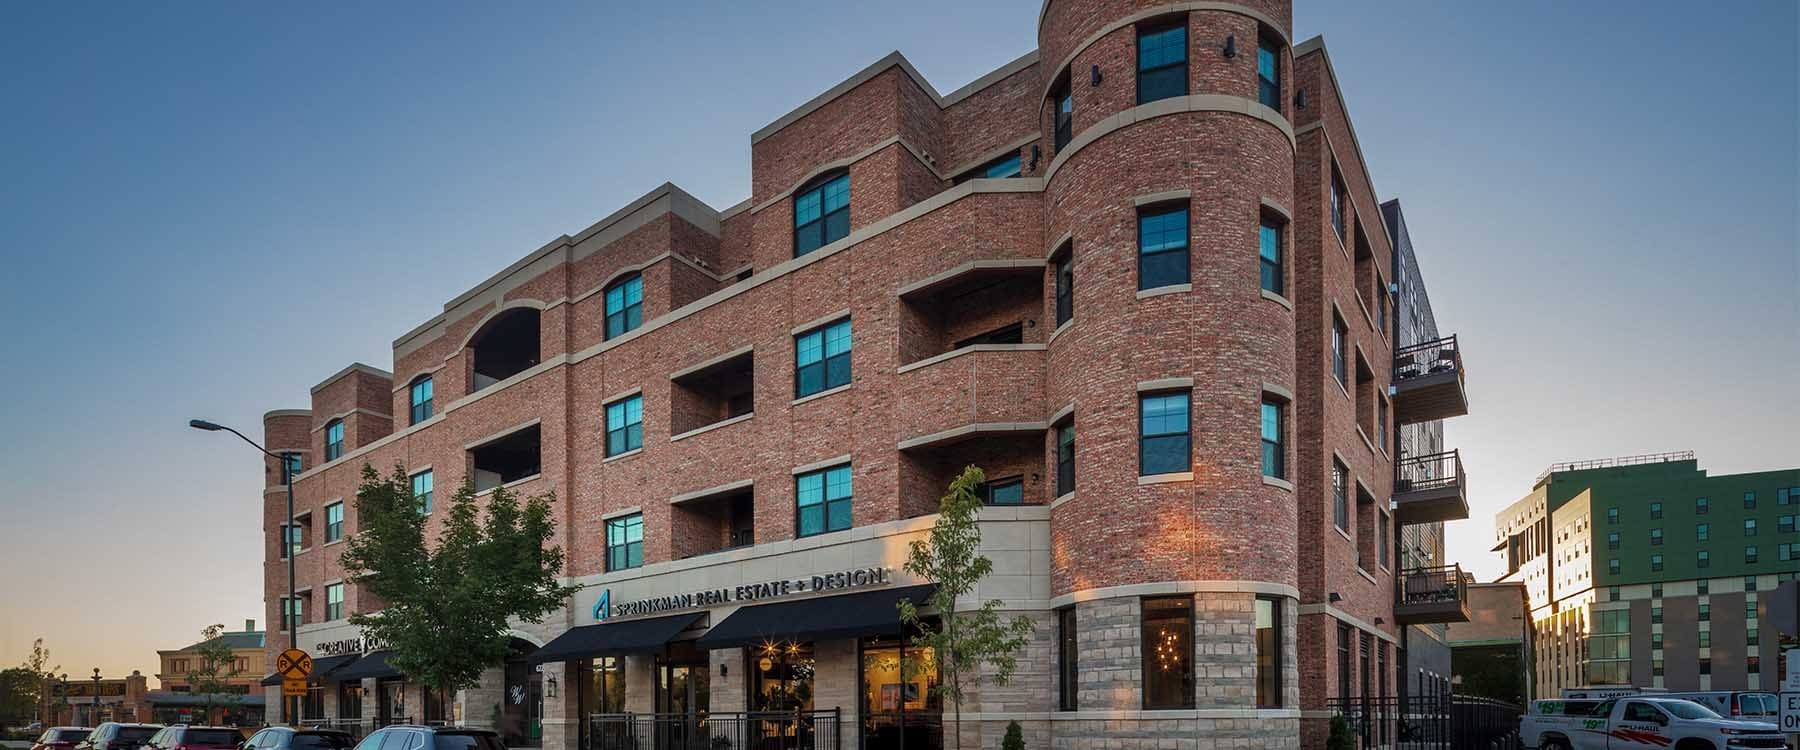 West Washington Place Apartments And Mixed Use development in Madison, Wisconsin provides additional multifamily housing options in an limited market